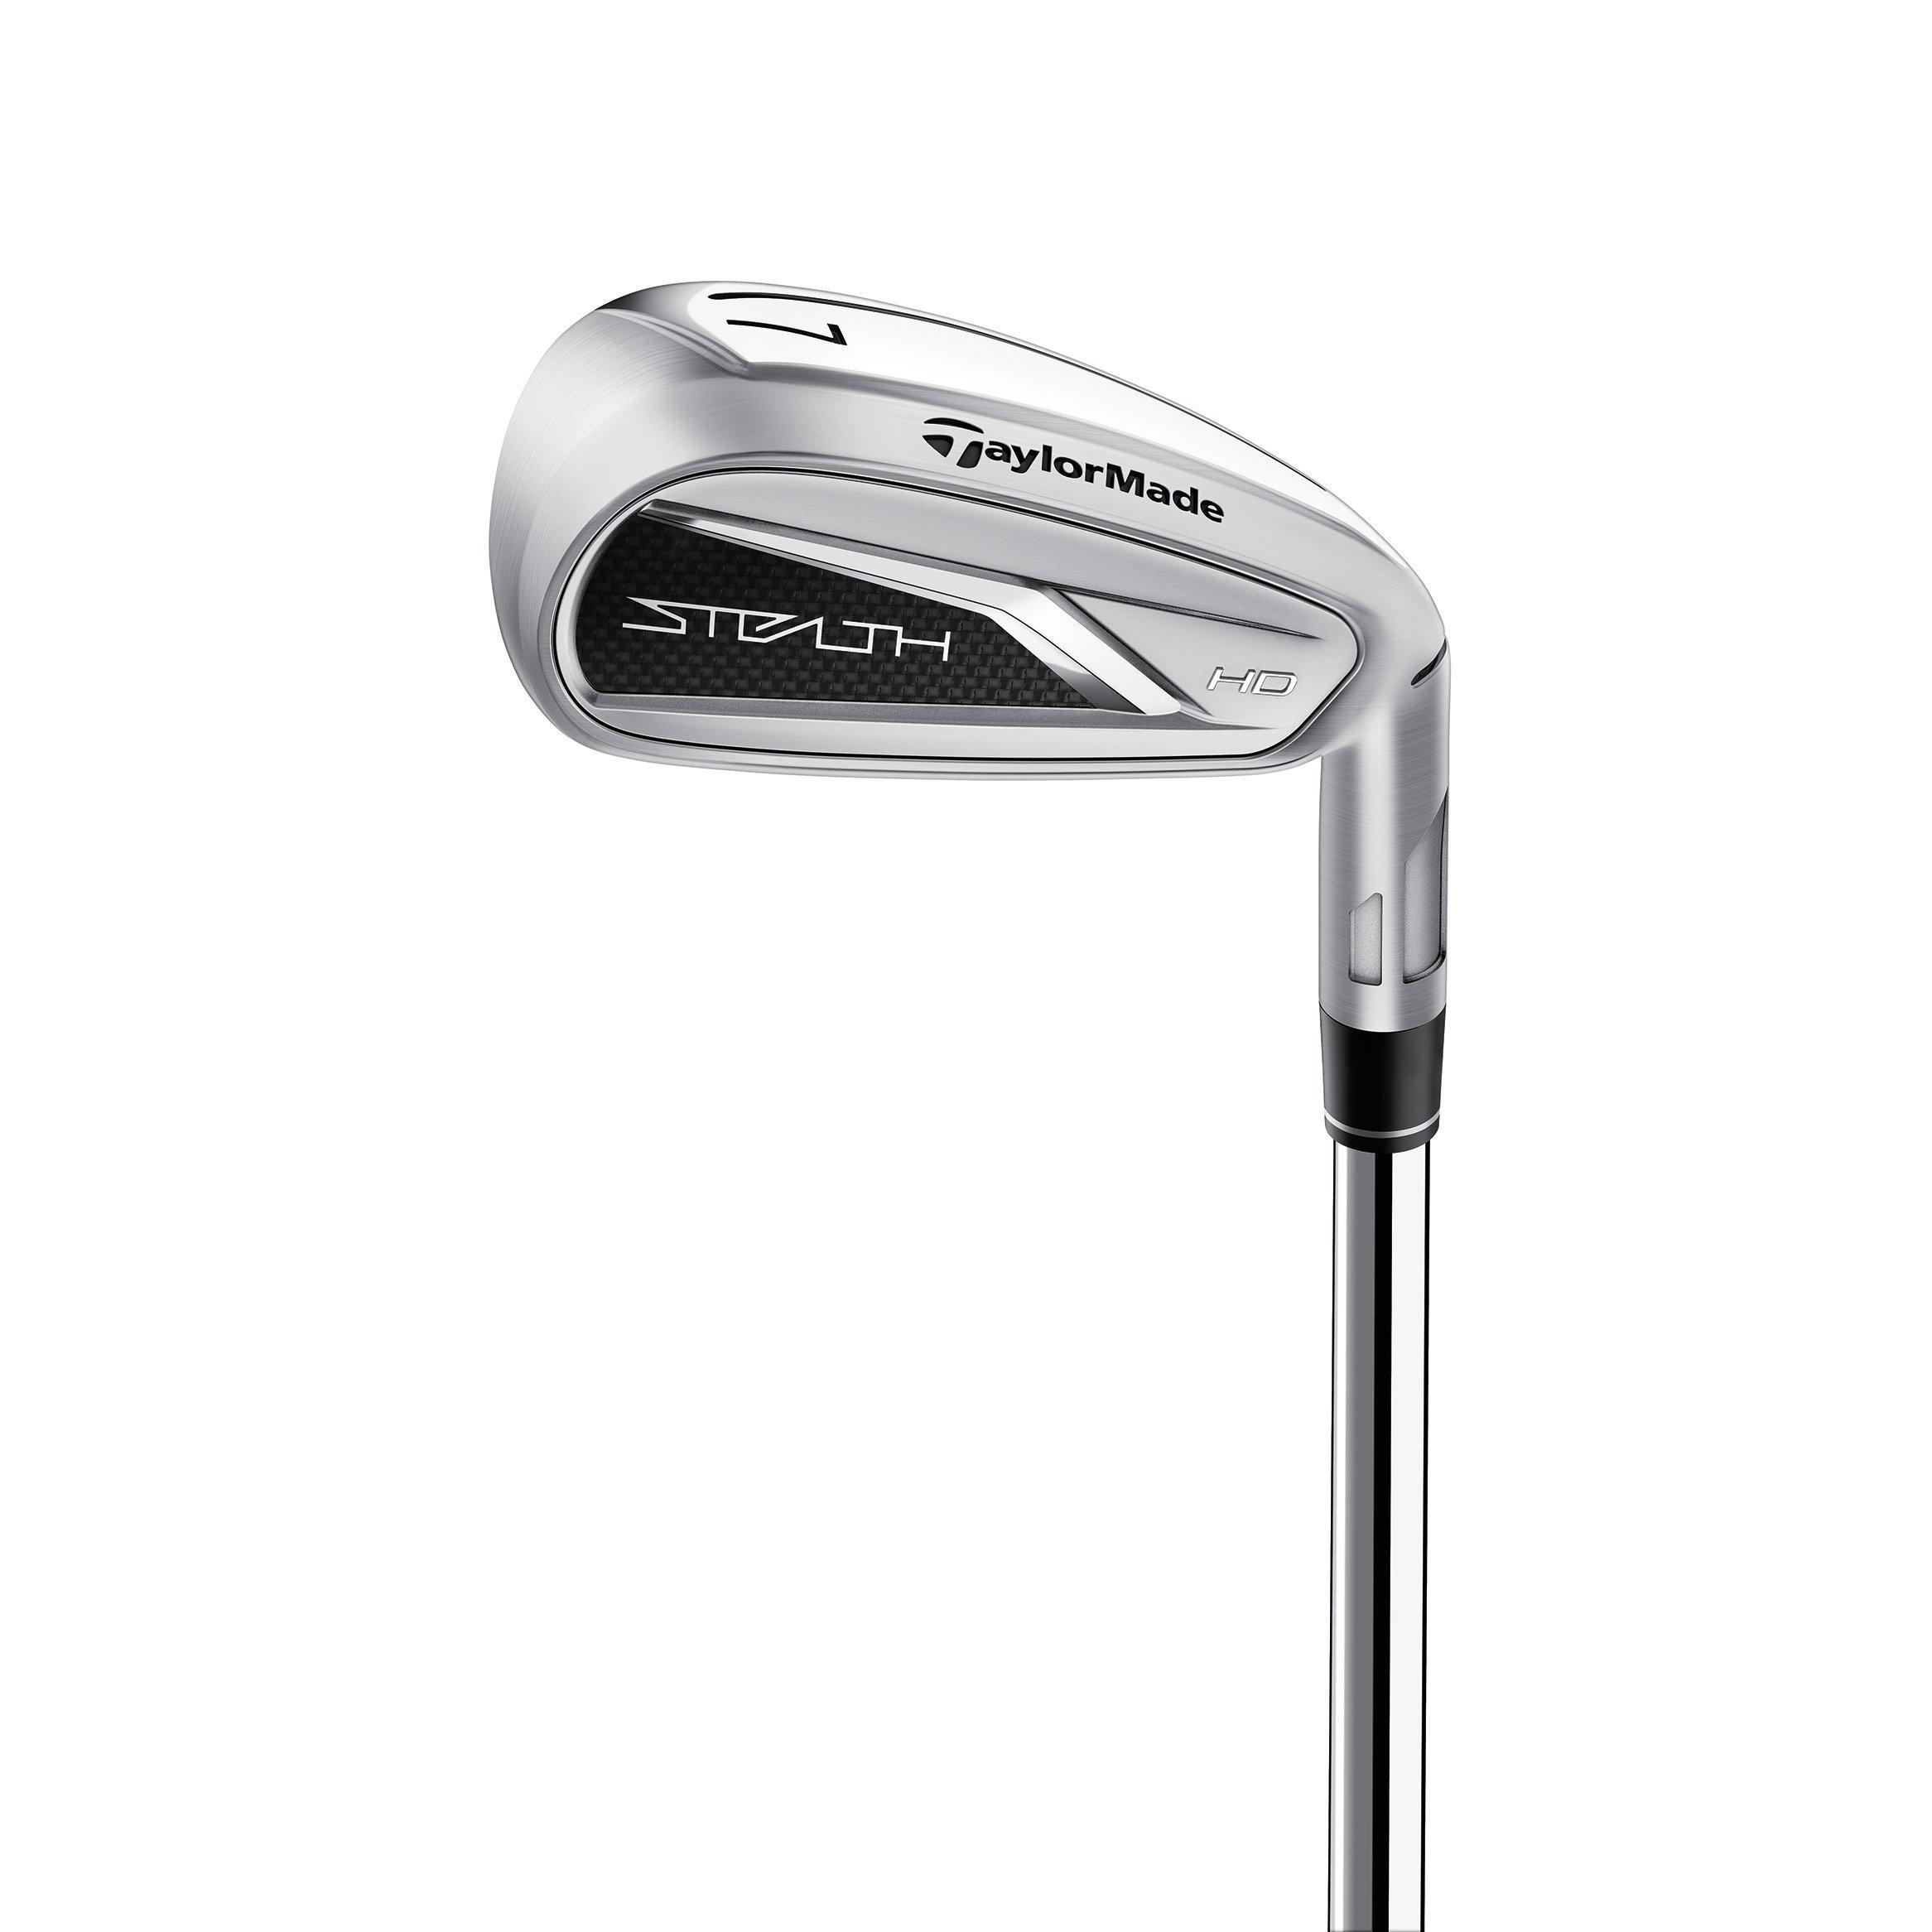 Stealth HD 5-PW AW Iron Set with Graphite Shafts | TAYLORMADE 